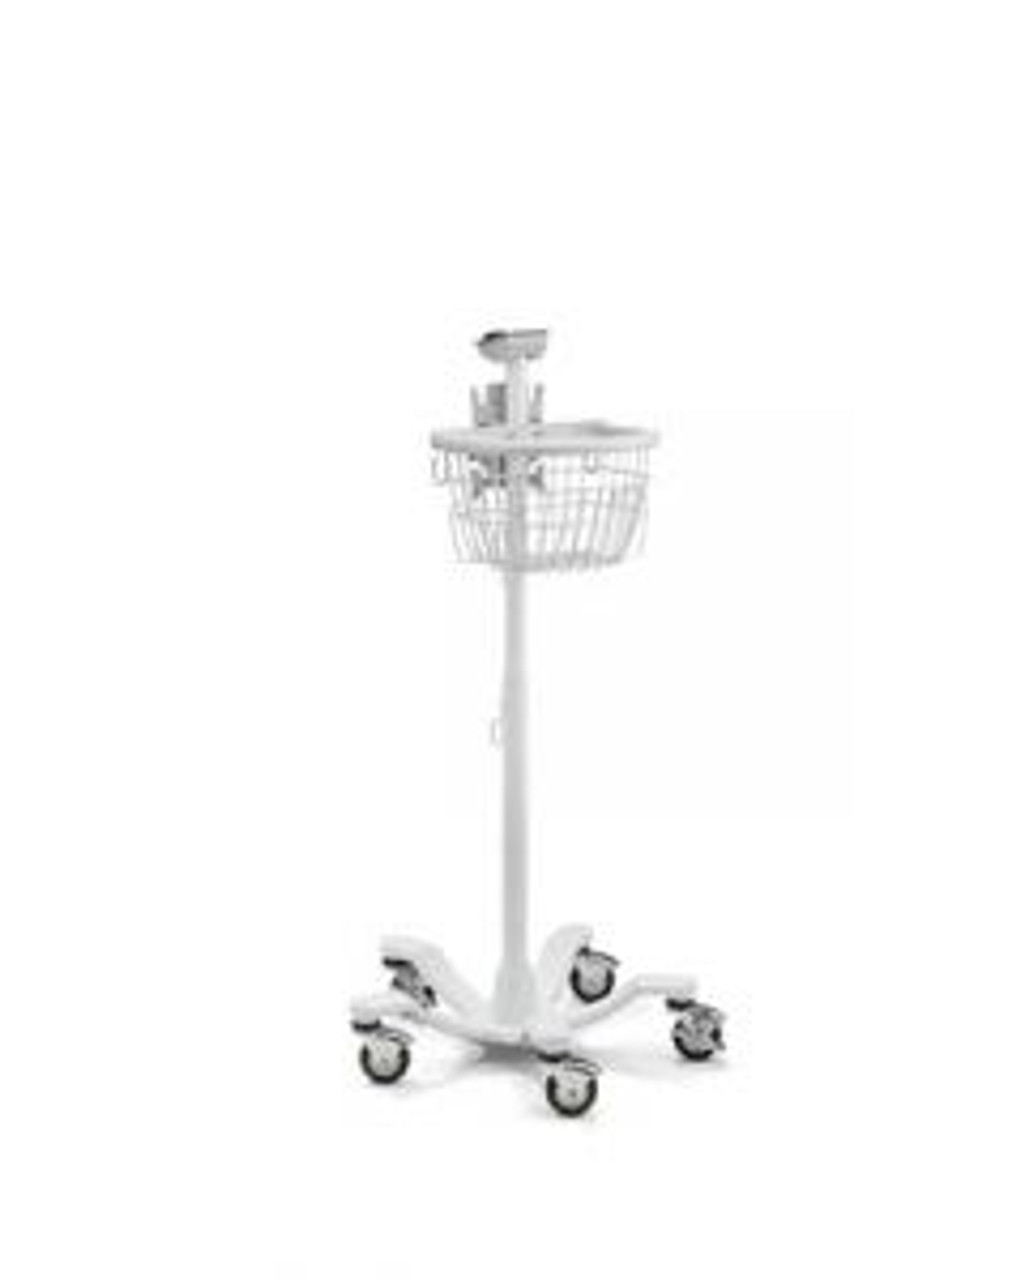 Welch Allyn 4700-60 MOBILE STAND WITH BASKET FOR ALL WELCH ALLYN SPOT OR SPOT LXI OR 300 SERIES VITAL SIGNS MONITOR